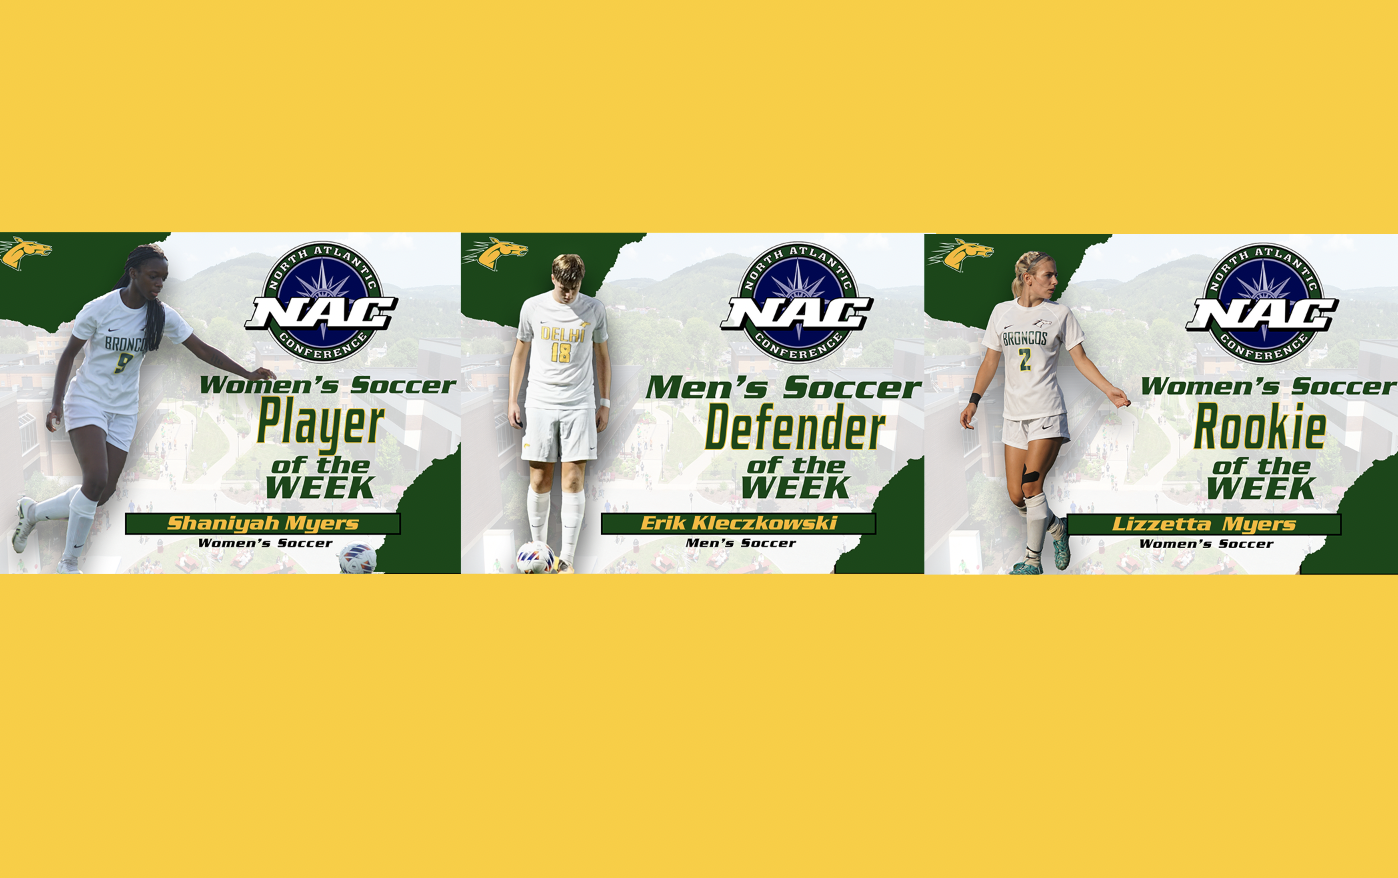 Delhi Soccer collects three North Atlantic Conference weekly awards (9/11)